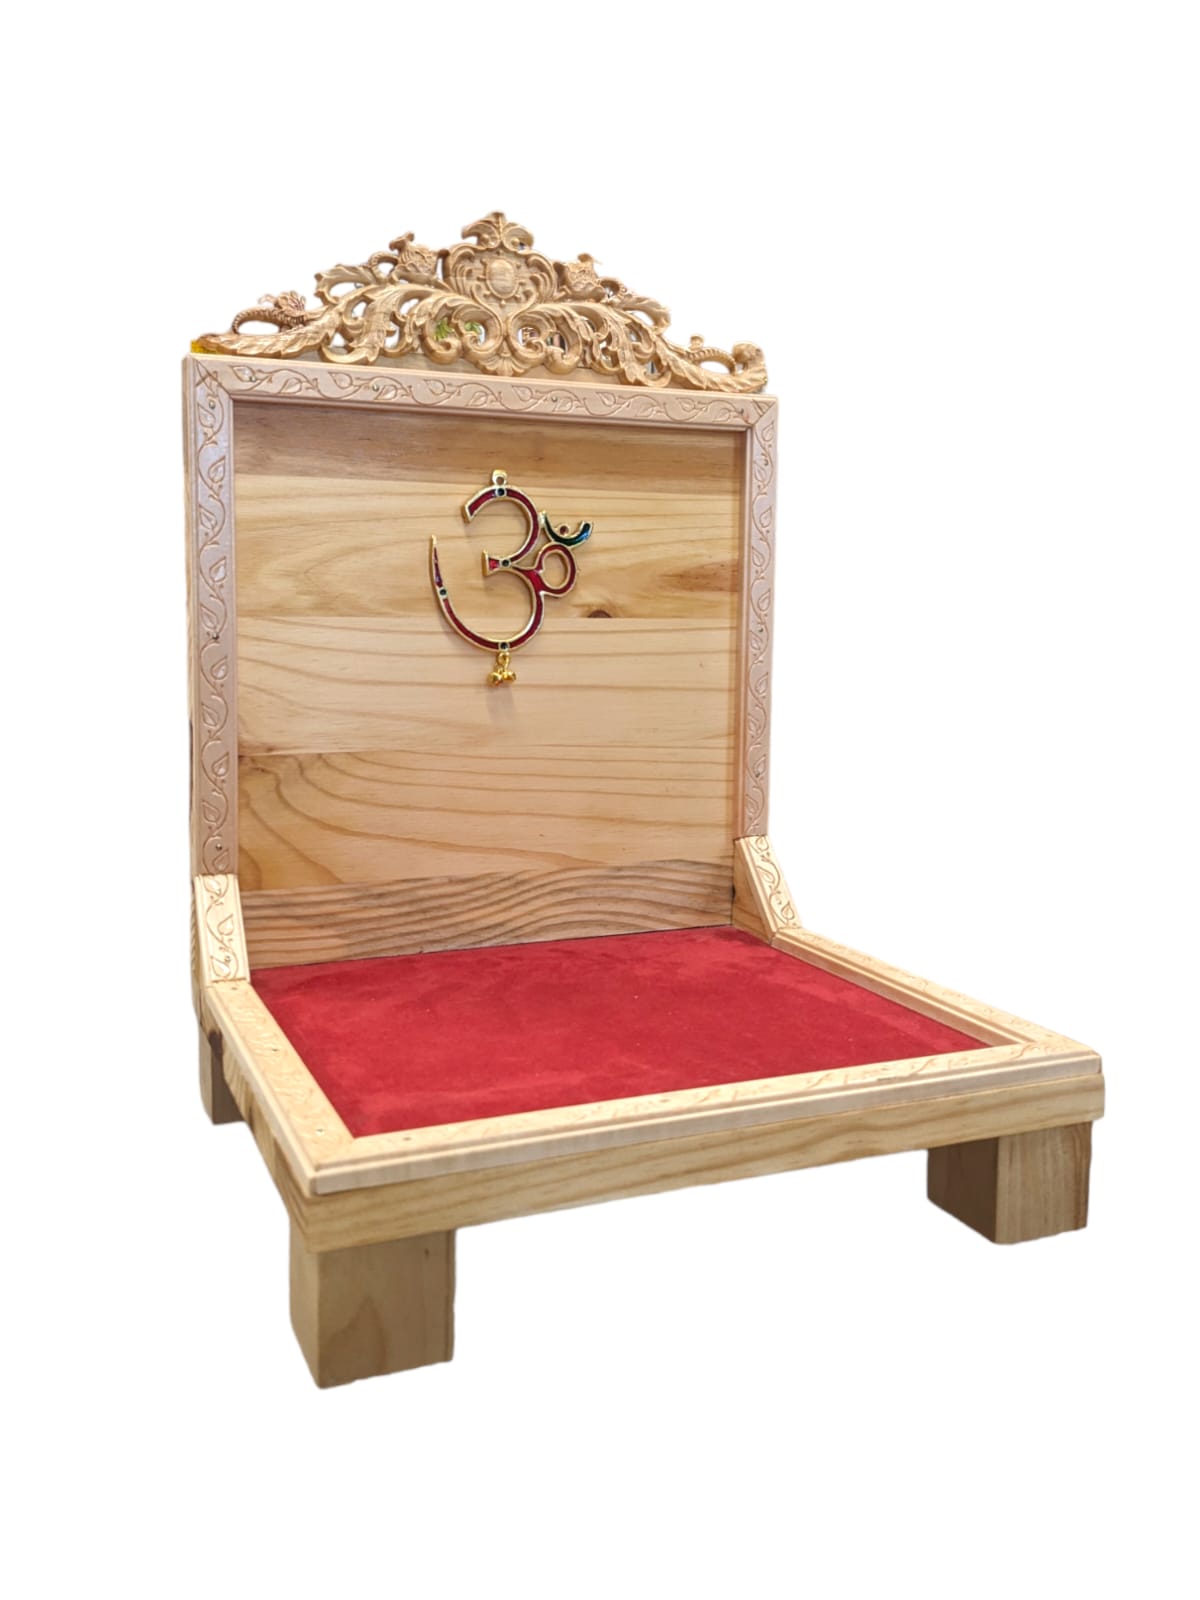 Image of a wooden singhasan with red velvet base, it can also be used as an open concept mandir